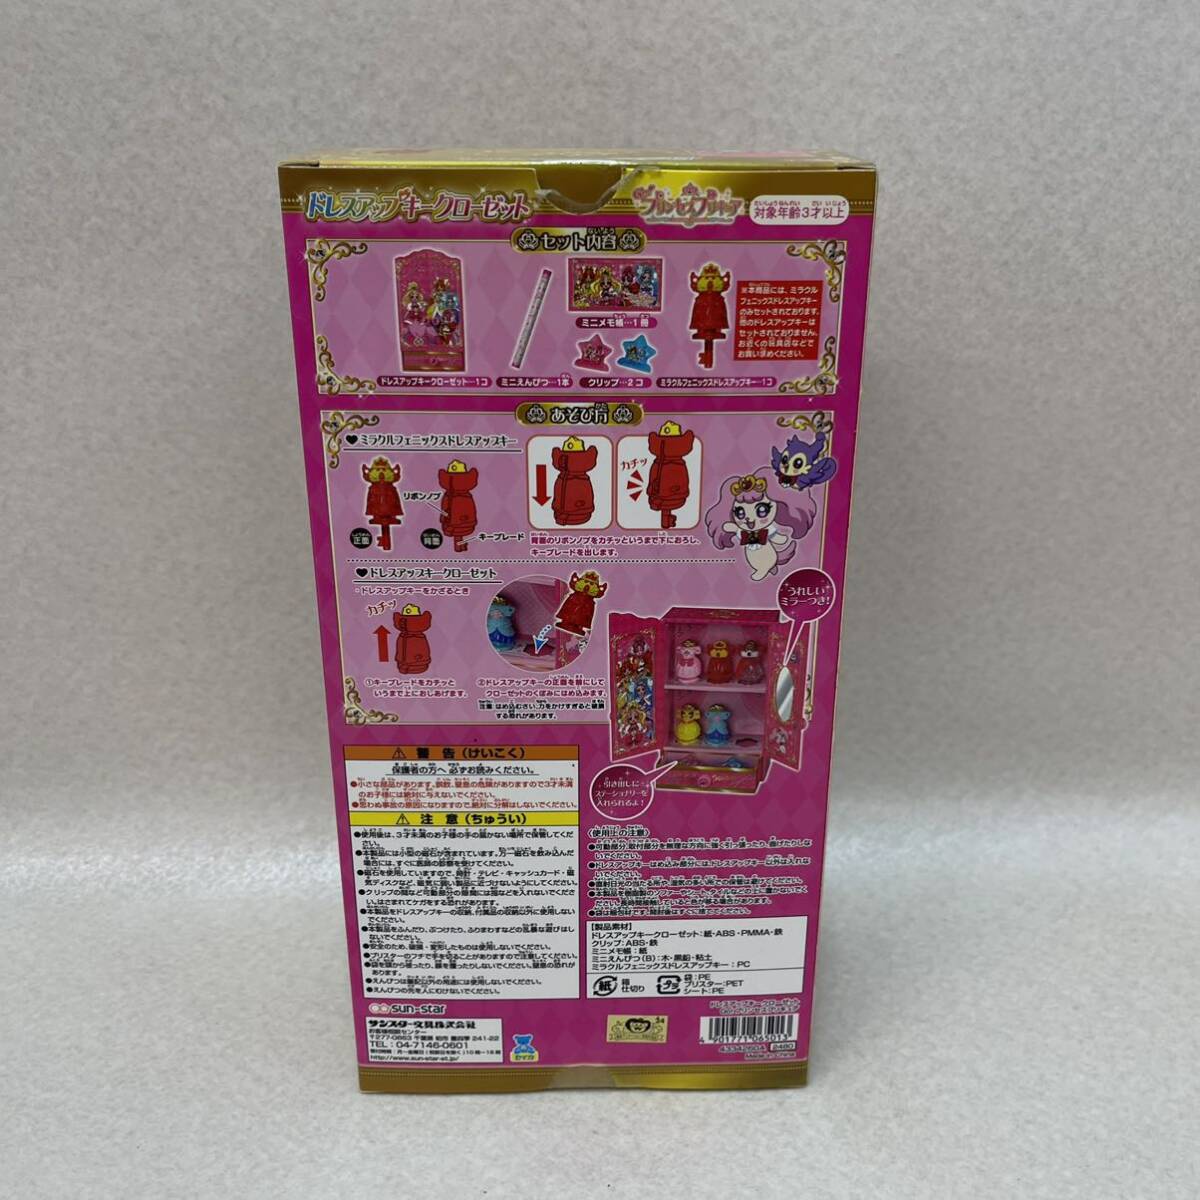 H2079* secondhand goods * Go! Princess Precure dress up key Princess puff .-m key closet including in a package un- possible 